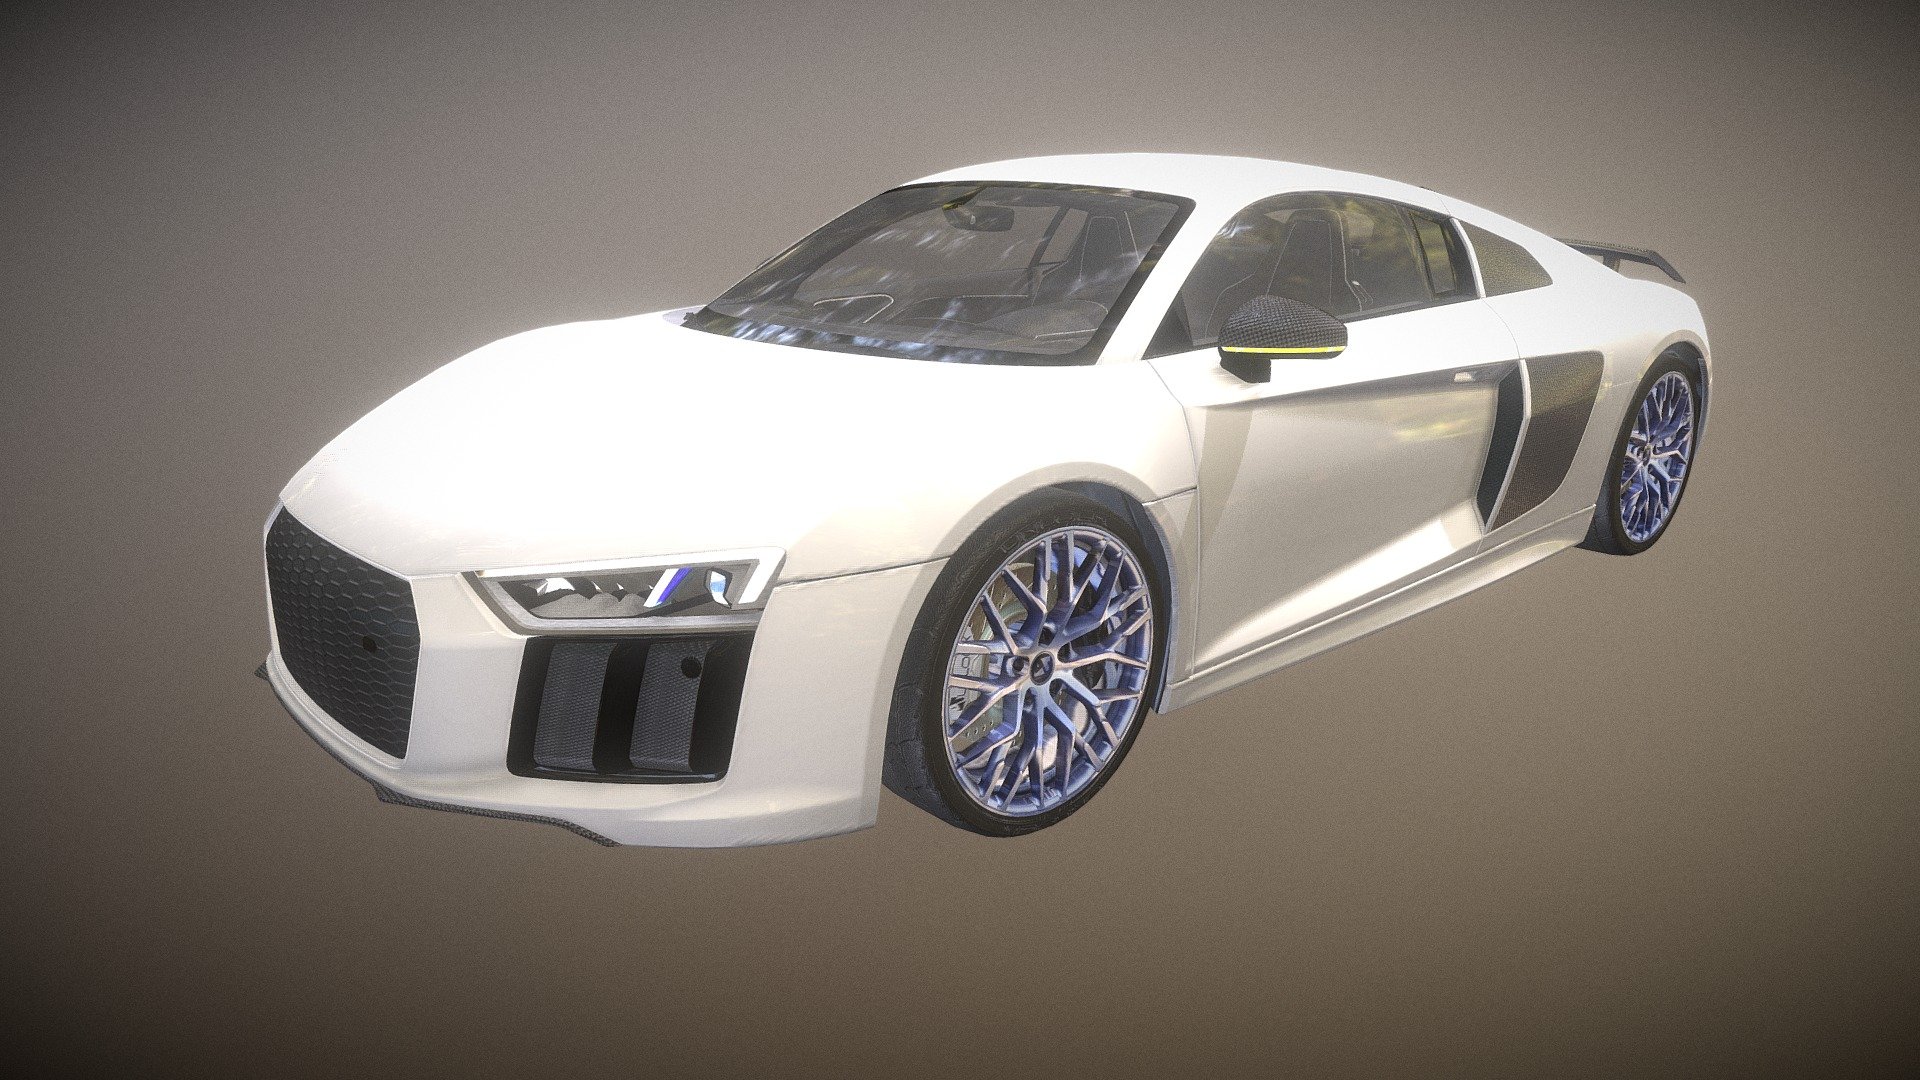 Subscribe and like my videos! - YouTube

https://www.youtube.com/watch?v=rKSFcY2d4J8&amp;feature=youtu.be

Sports car model for game.
**** - Unlock Super Sports Car 05 - Buy Royalty Free 3D model by UnlockGameAssets 3d model